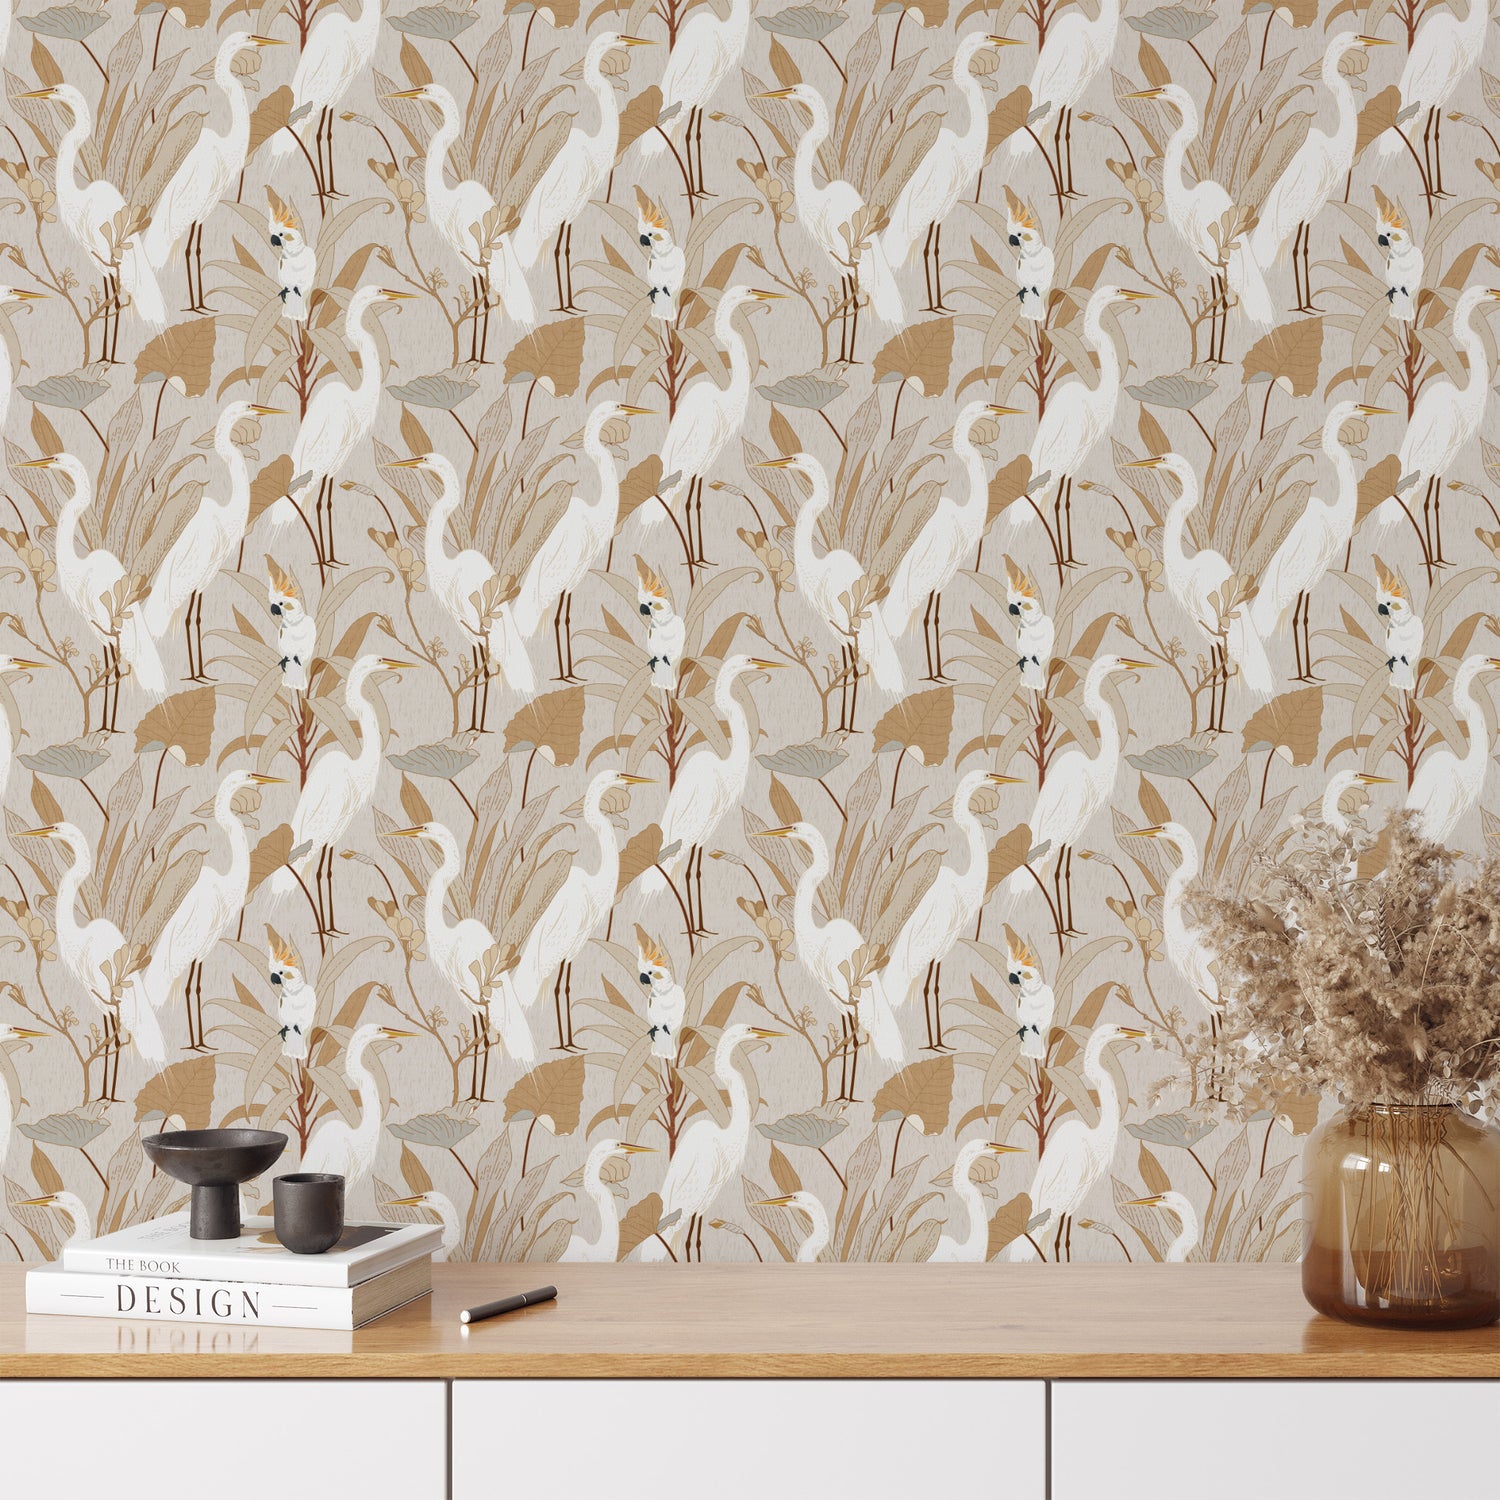 Designed with an eye-catching flair of animals and class, Cranes and Cockatoo Wallpaper - Bone encaptures tasteful luxury. This exclusive wallpaper features a sophisticated design of cranes and cockatoos, perfect for bringing a sense of refinement and elegance to your home.